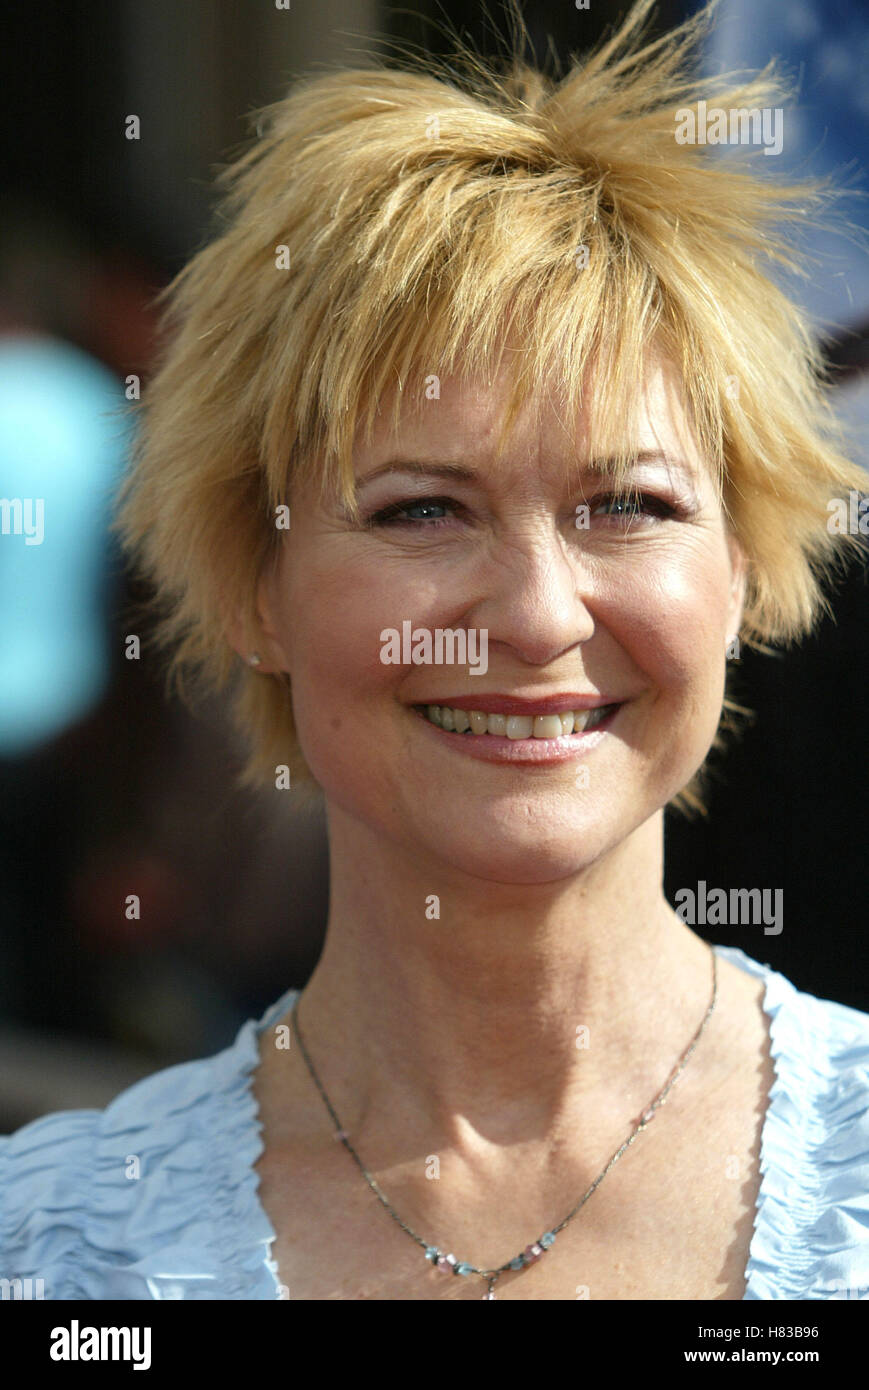 DEE WALLACE STONE ET 20TH ANNIVERSARY PREMIERE SHRINE AUDITORIUM LOS ANGELES USA 16 March 2002 Stock Photo